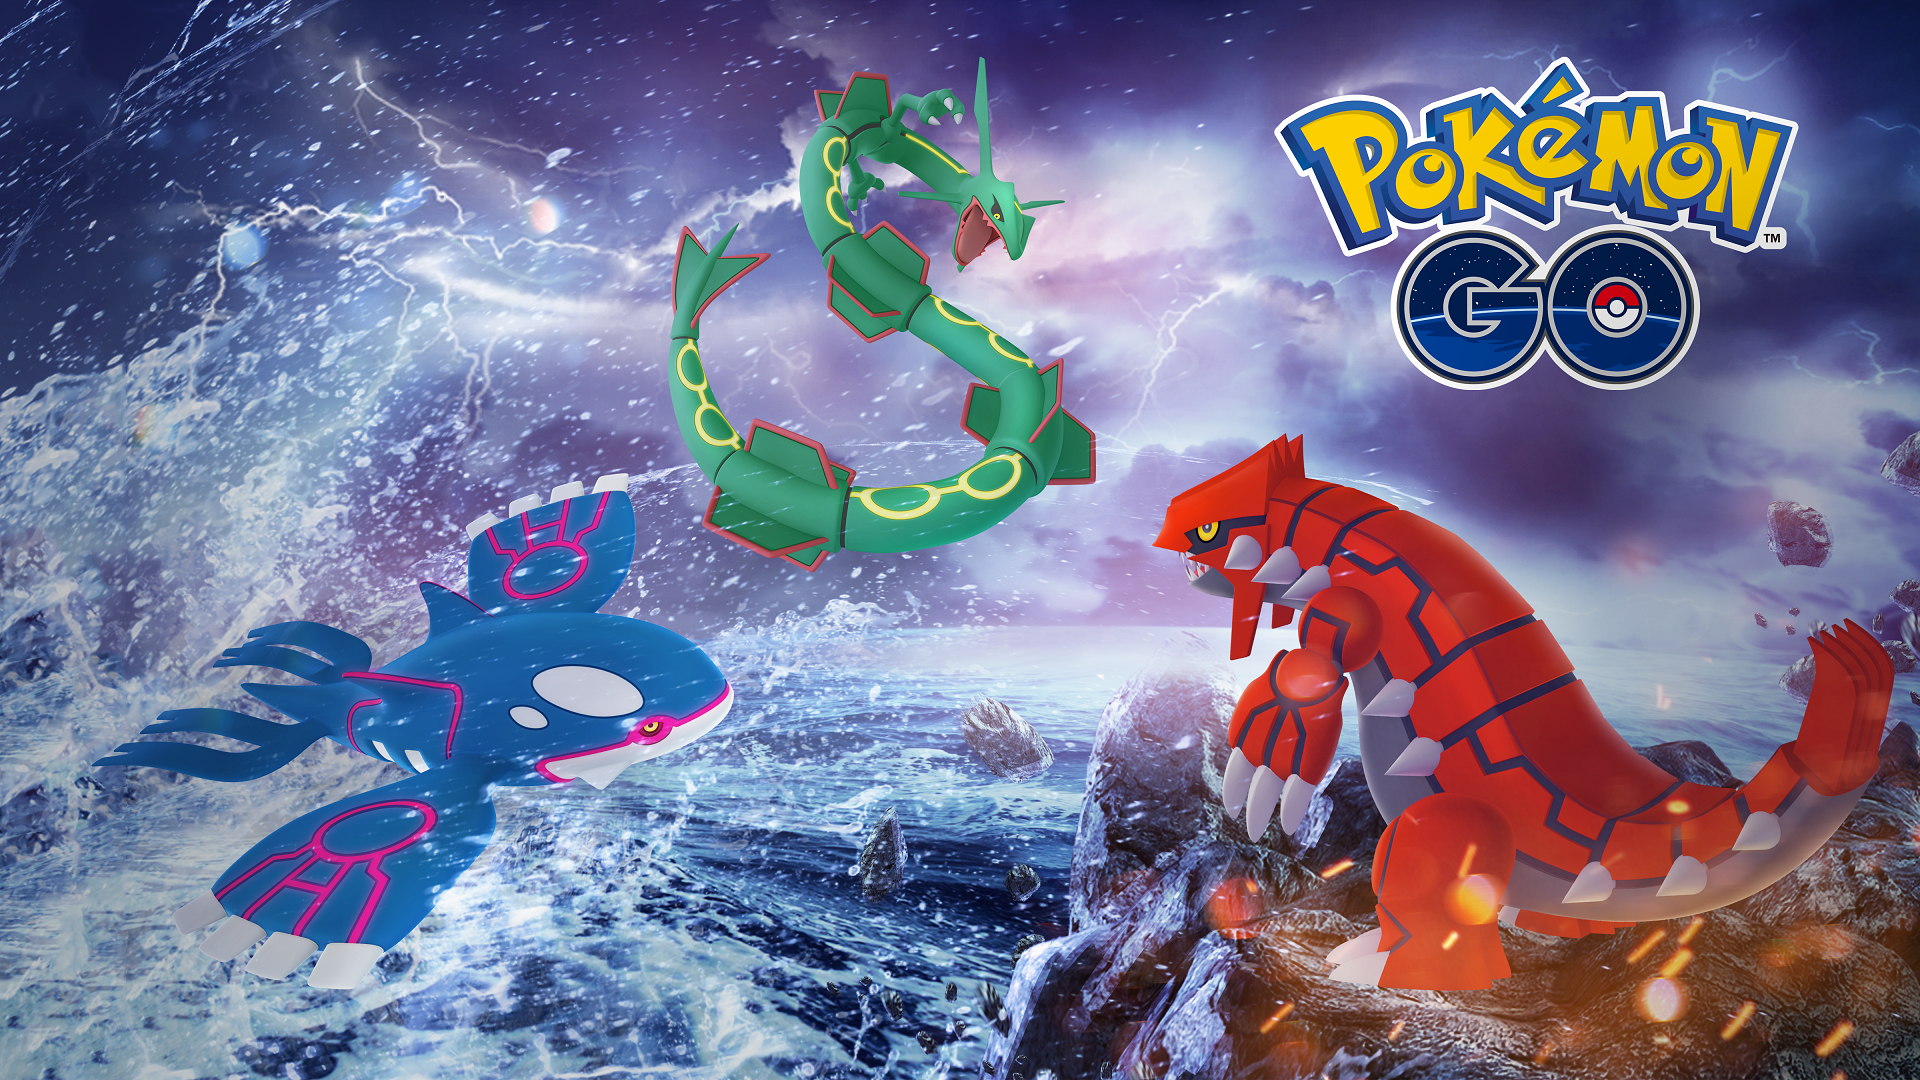 Pokemon Go best Pokemon: Two Pokemon leaping out of the water to attack a fiery dragon-like Pokemon on the cliff edge.